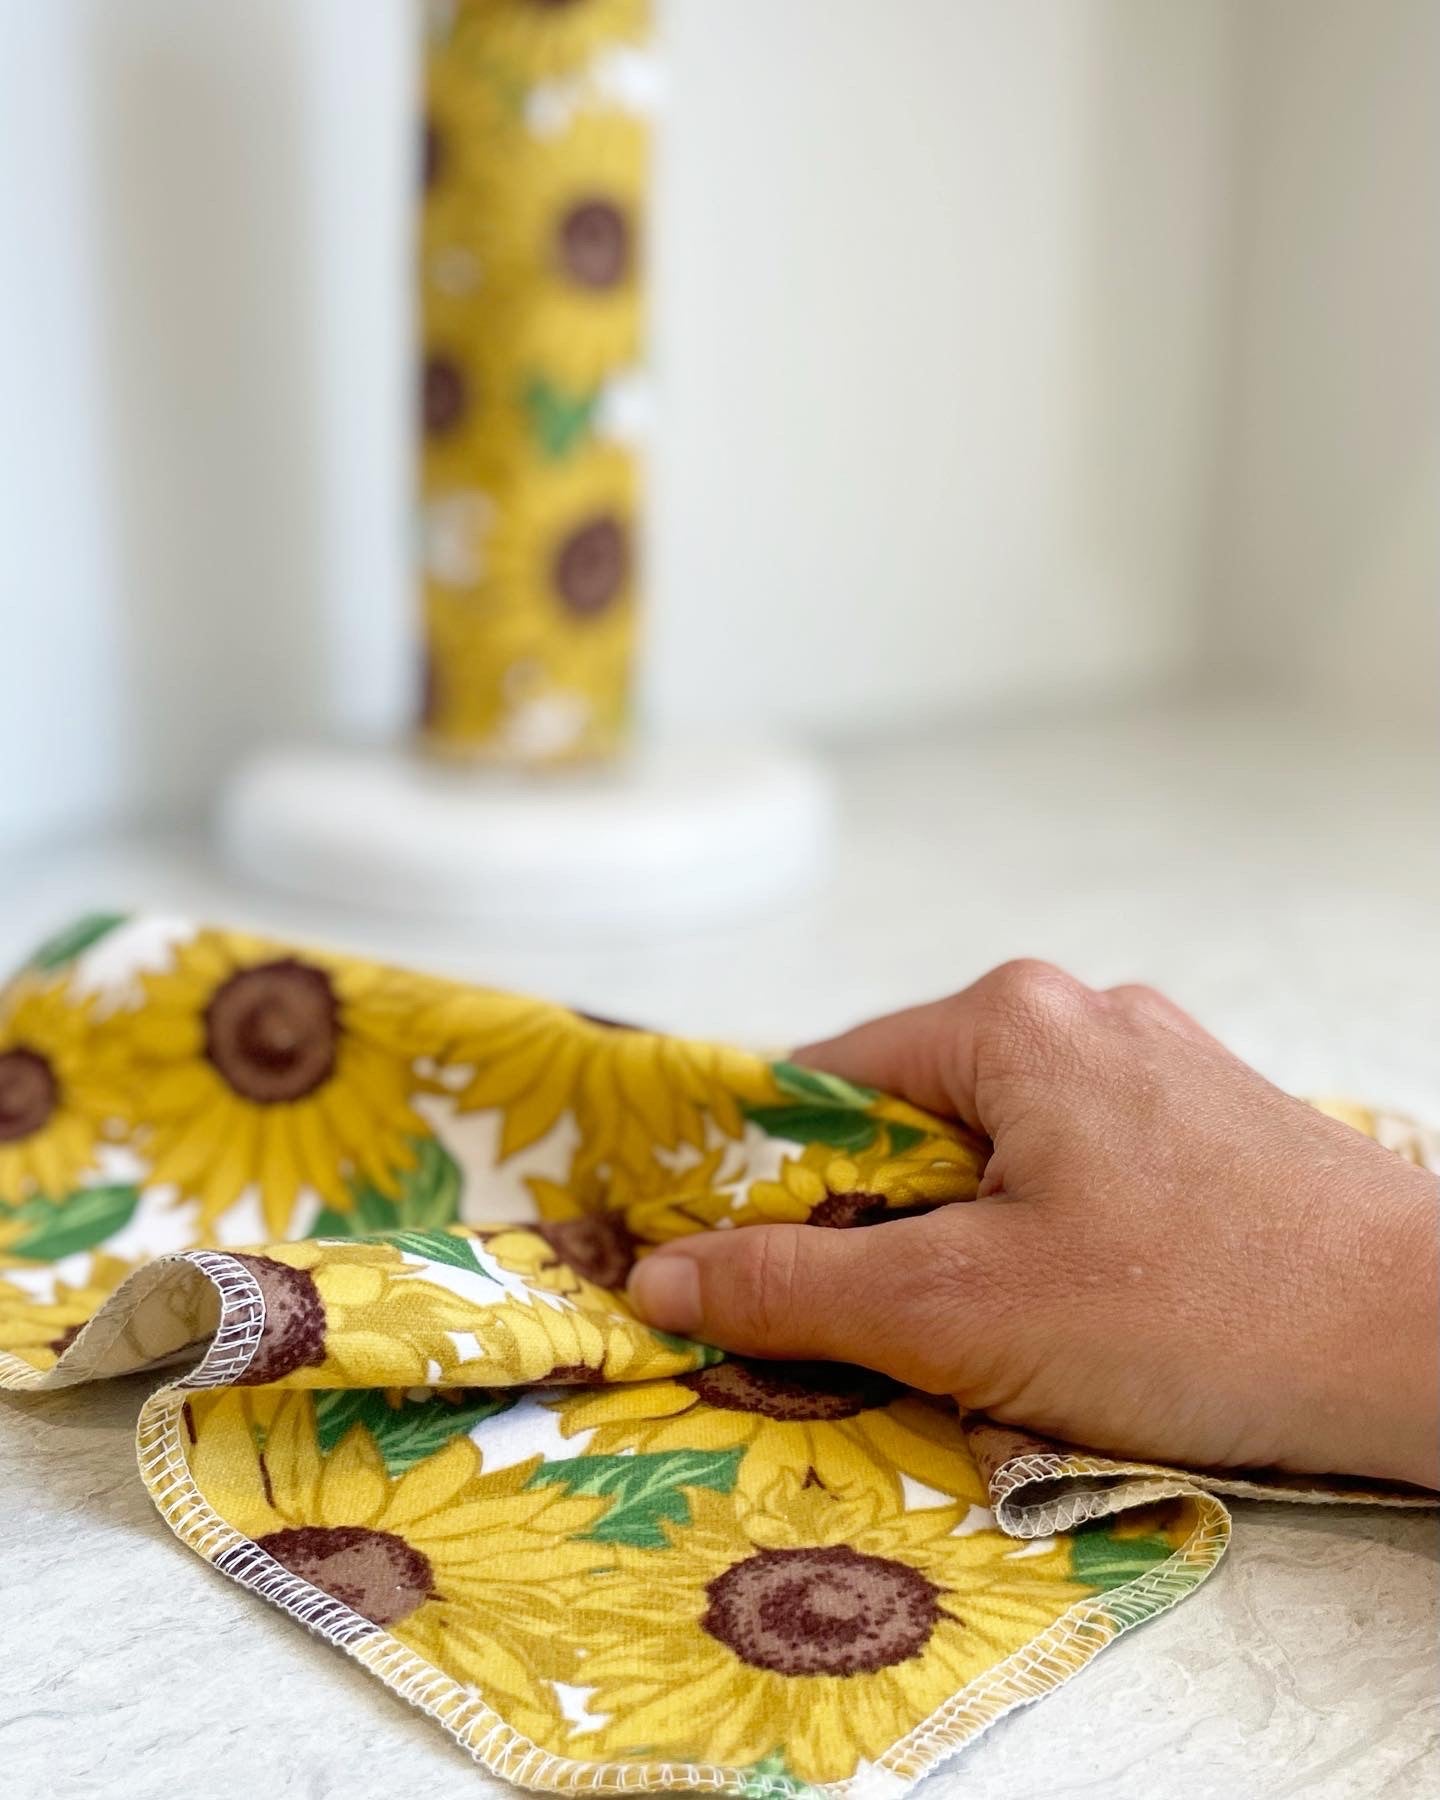 Un / Reusable Snapping Paperless Paper Towels bee Garden Sustainable Eco  Friendly Cloth Kitchen Hand Dish Towels Yellow Floral 